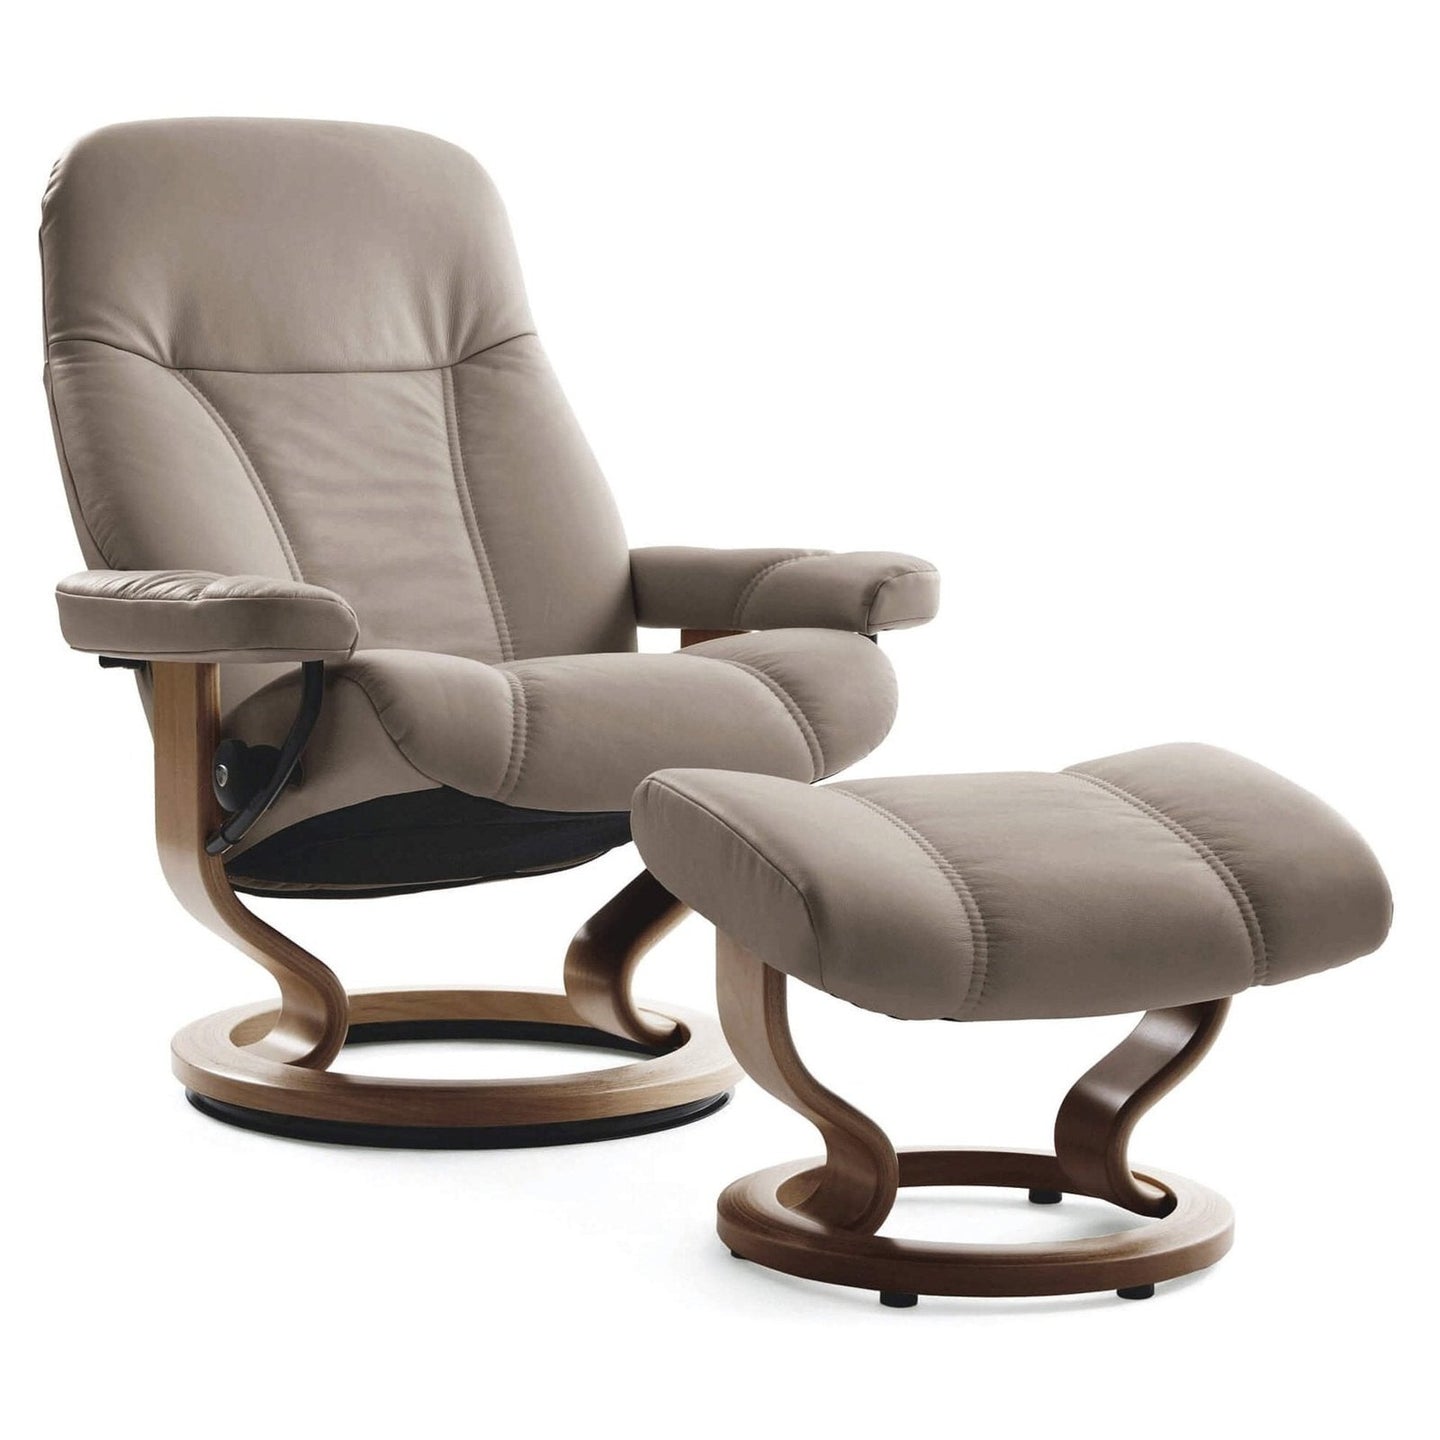 Stressless Consul Large Recliner Chair